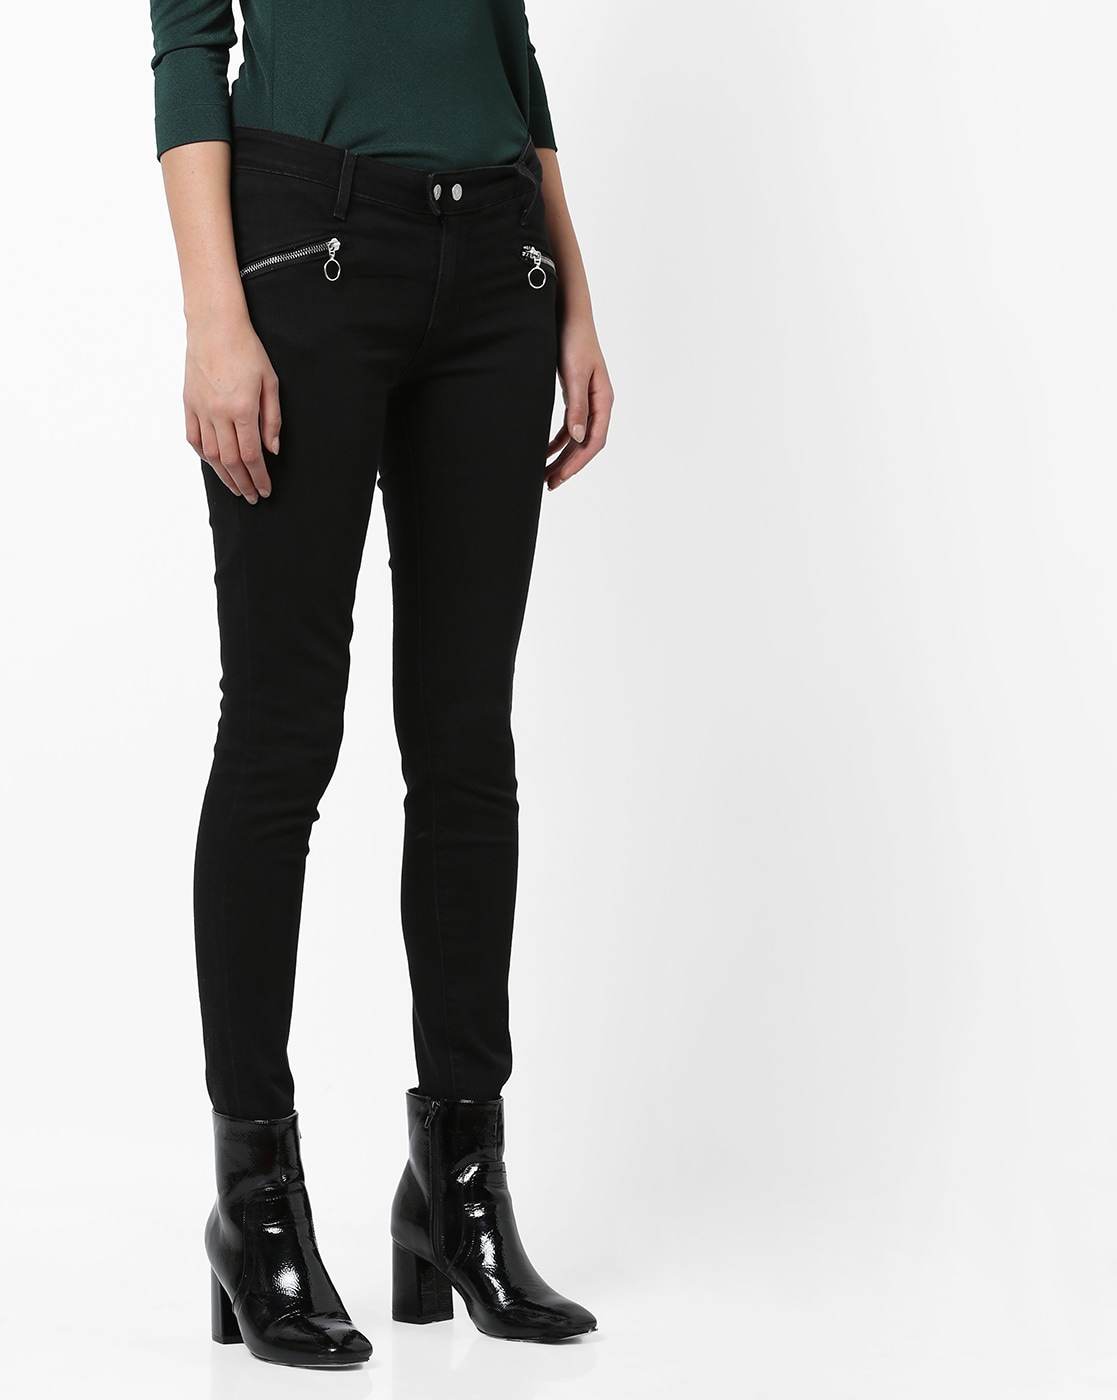 black jeggings with pockets